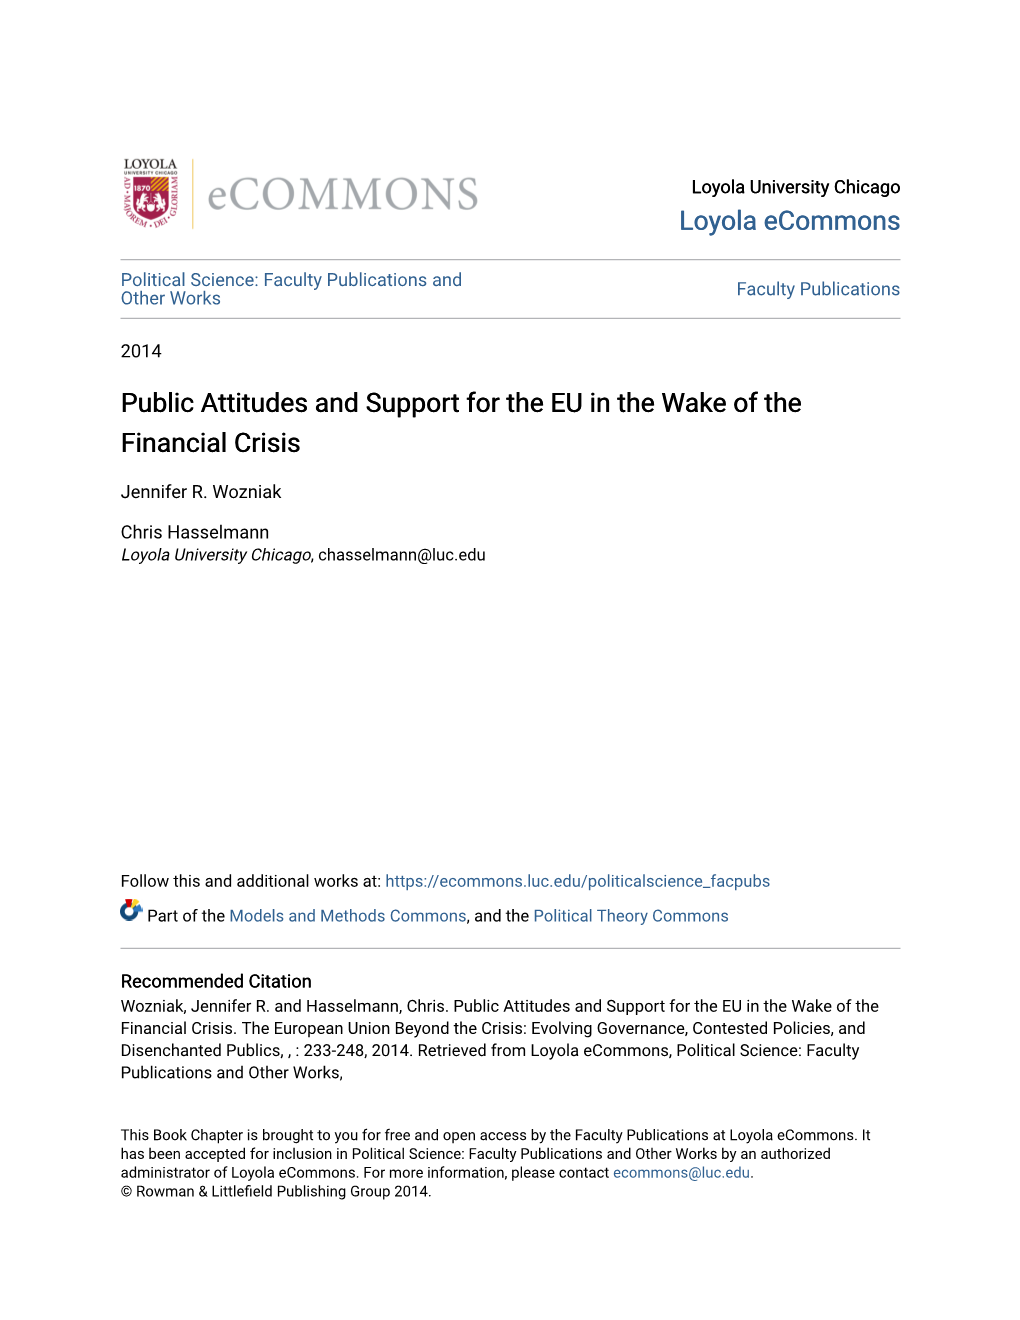 Public Attitudes and Support for the EU in the Wake of the Financial Crisis